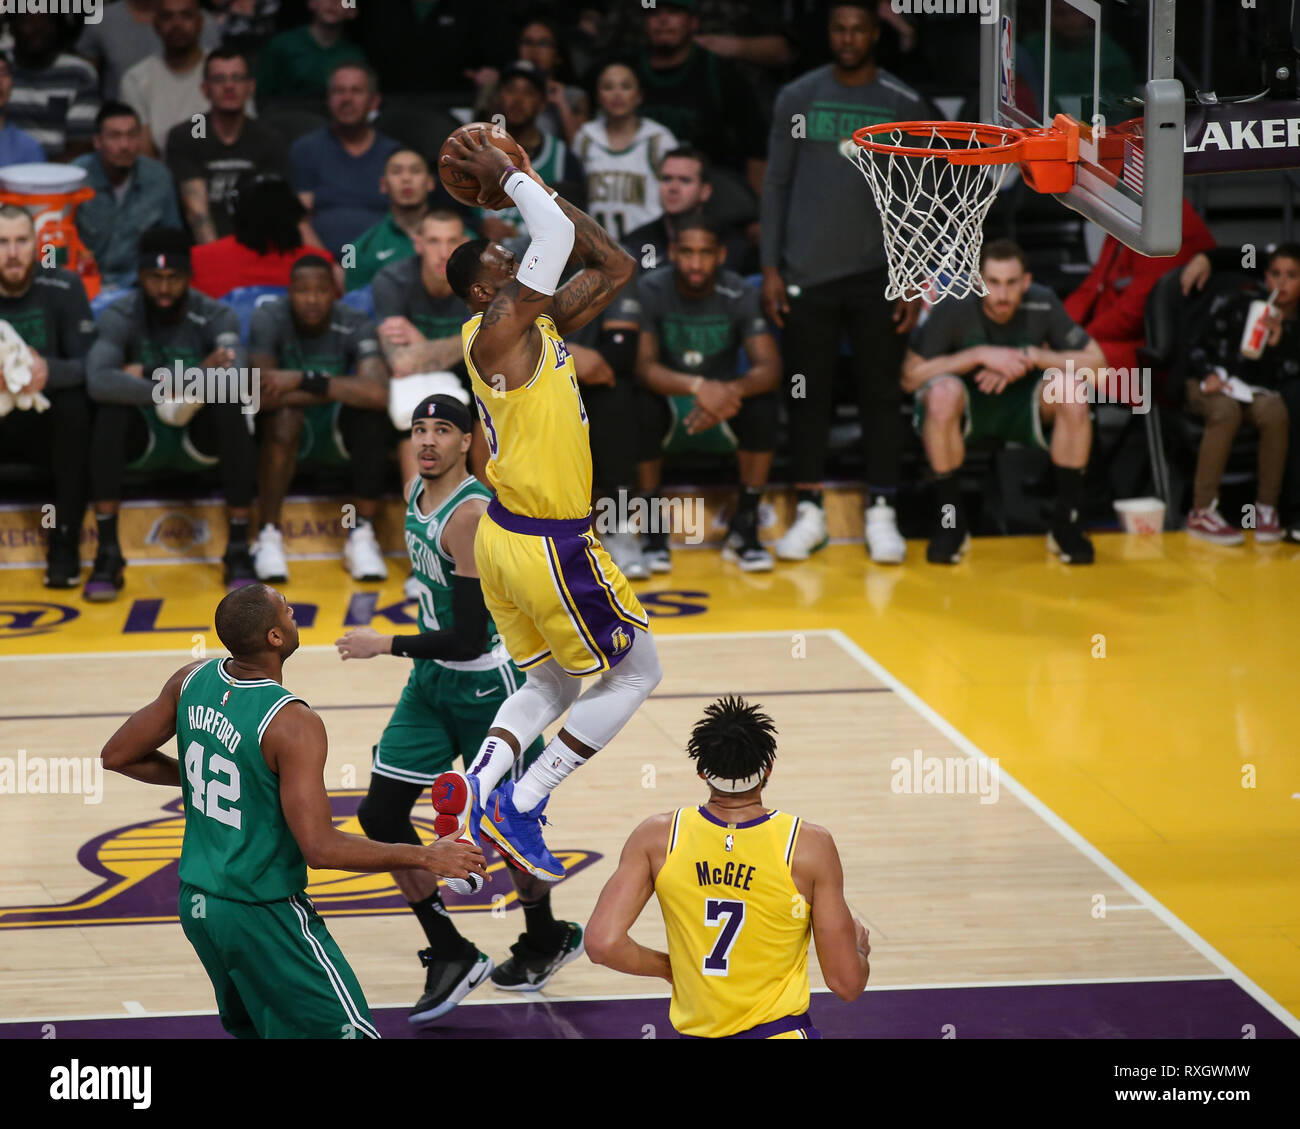 Los Angeles Lakers forward LeBron James #23 flying in for a dunk during the Boston Celtics vs Los Angeles Lakers game at Staples Center in Los Angeles, CA on March 09, 2019. (Photo by Jevone Moore) Stock Photo